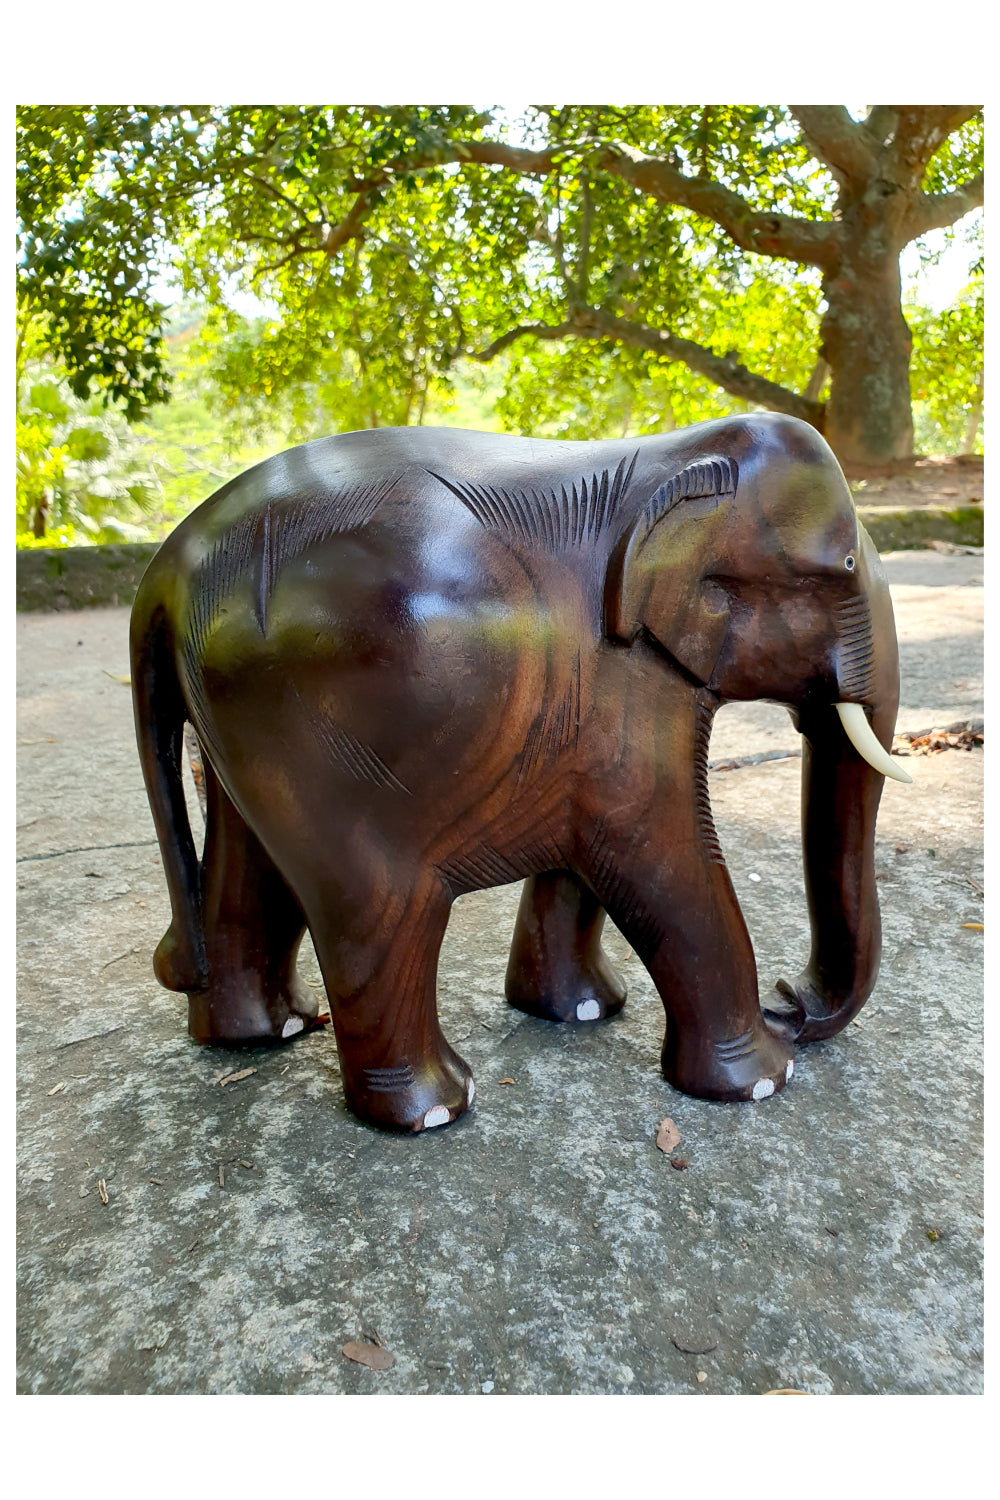 Southloom Handmade Elephant Handicraft (Carved from Rose Wood) 6 Inches